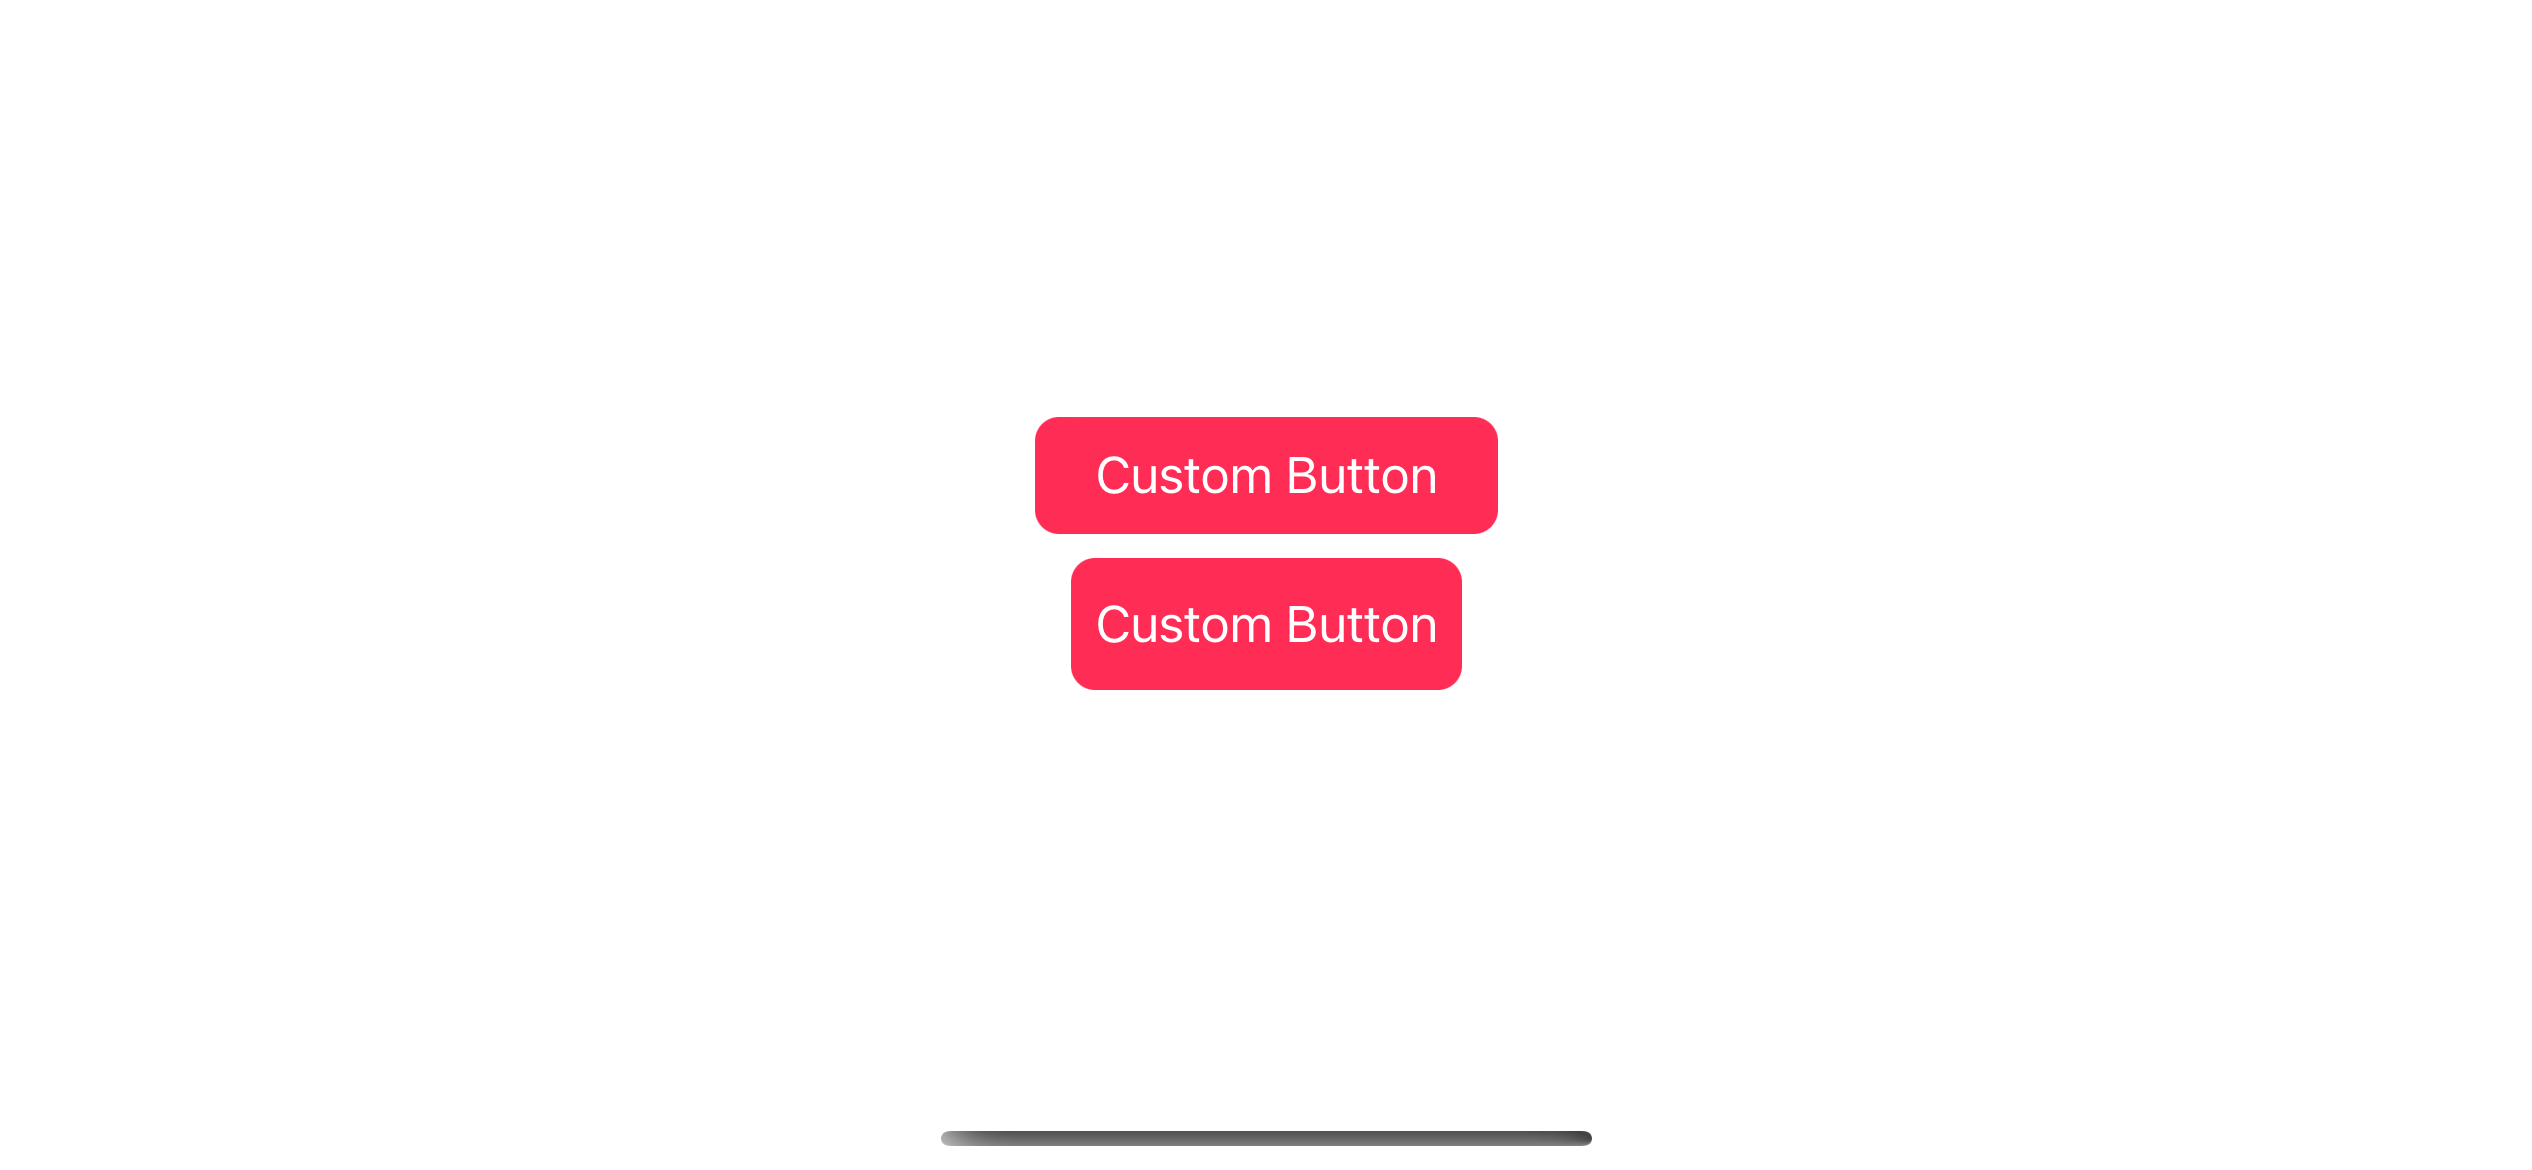 The use of padding and frame to control button sizes.